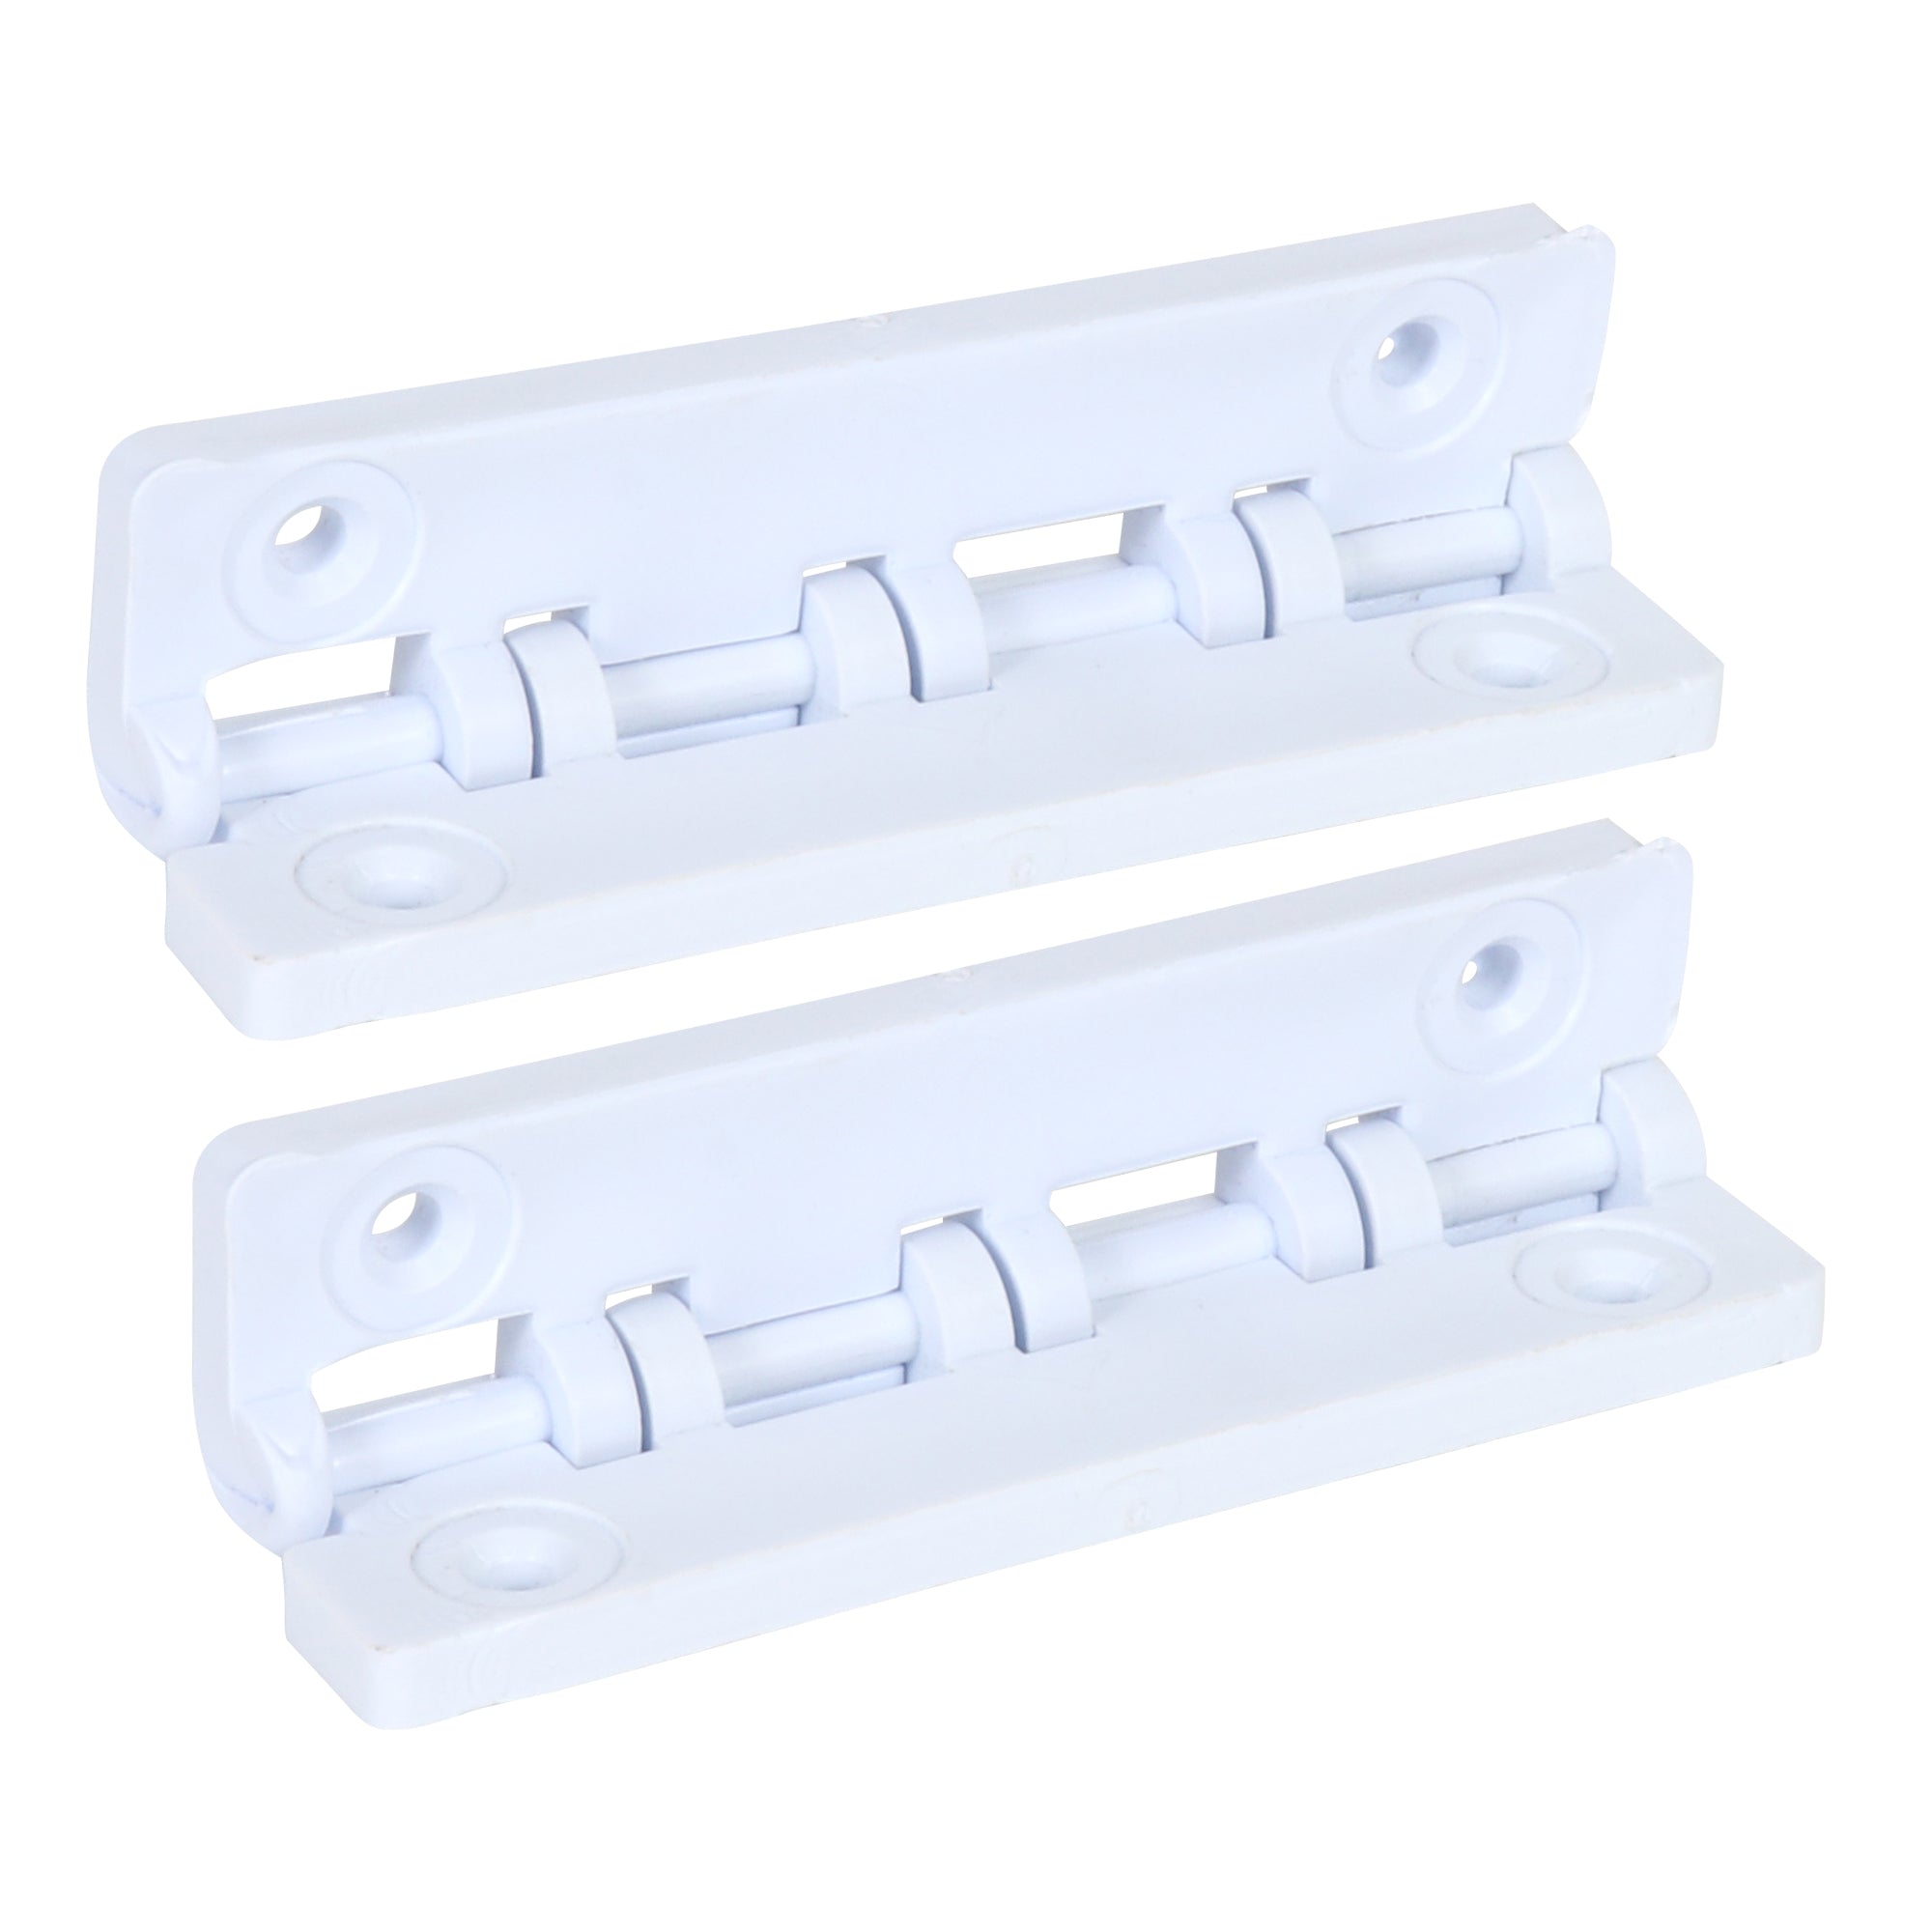 Image of 2 sets of door hinges on a white background.